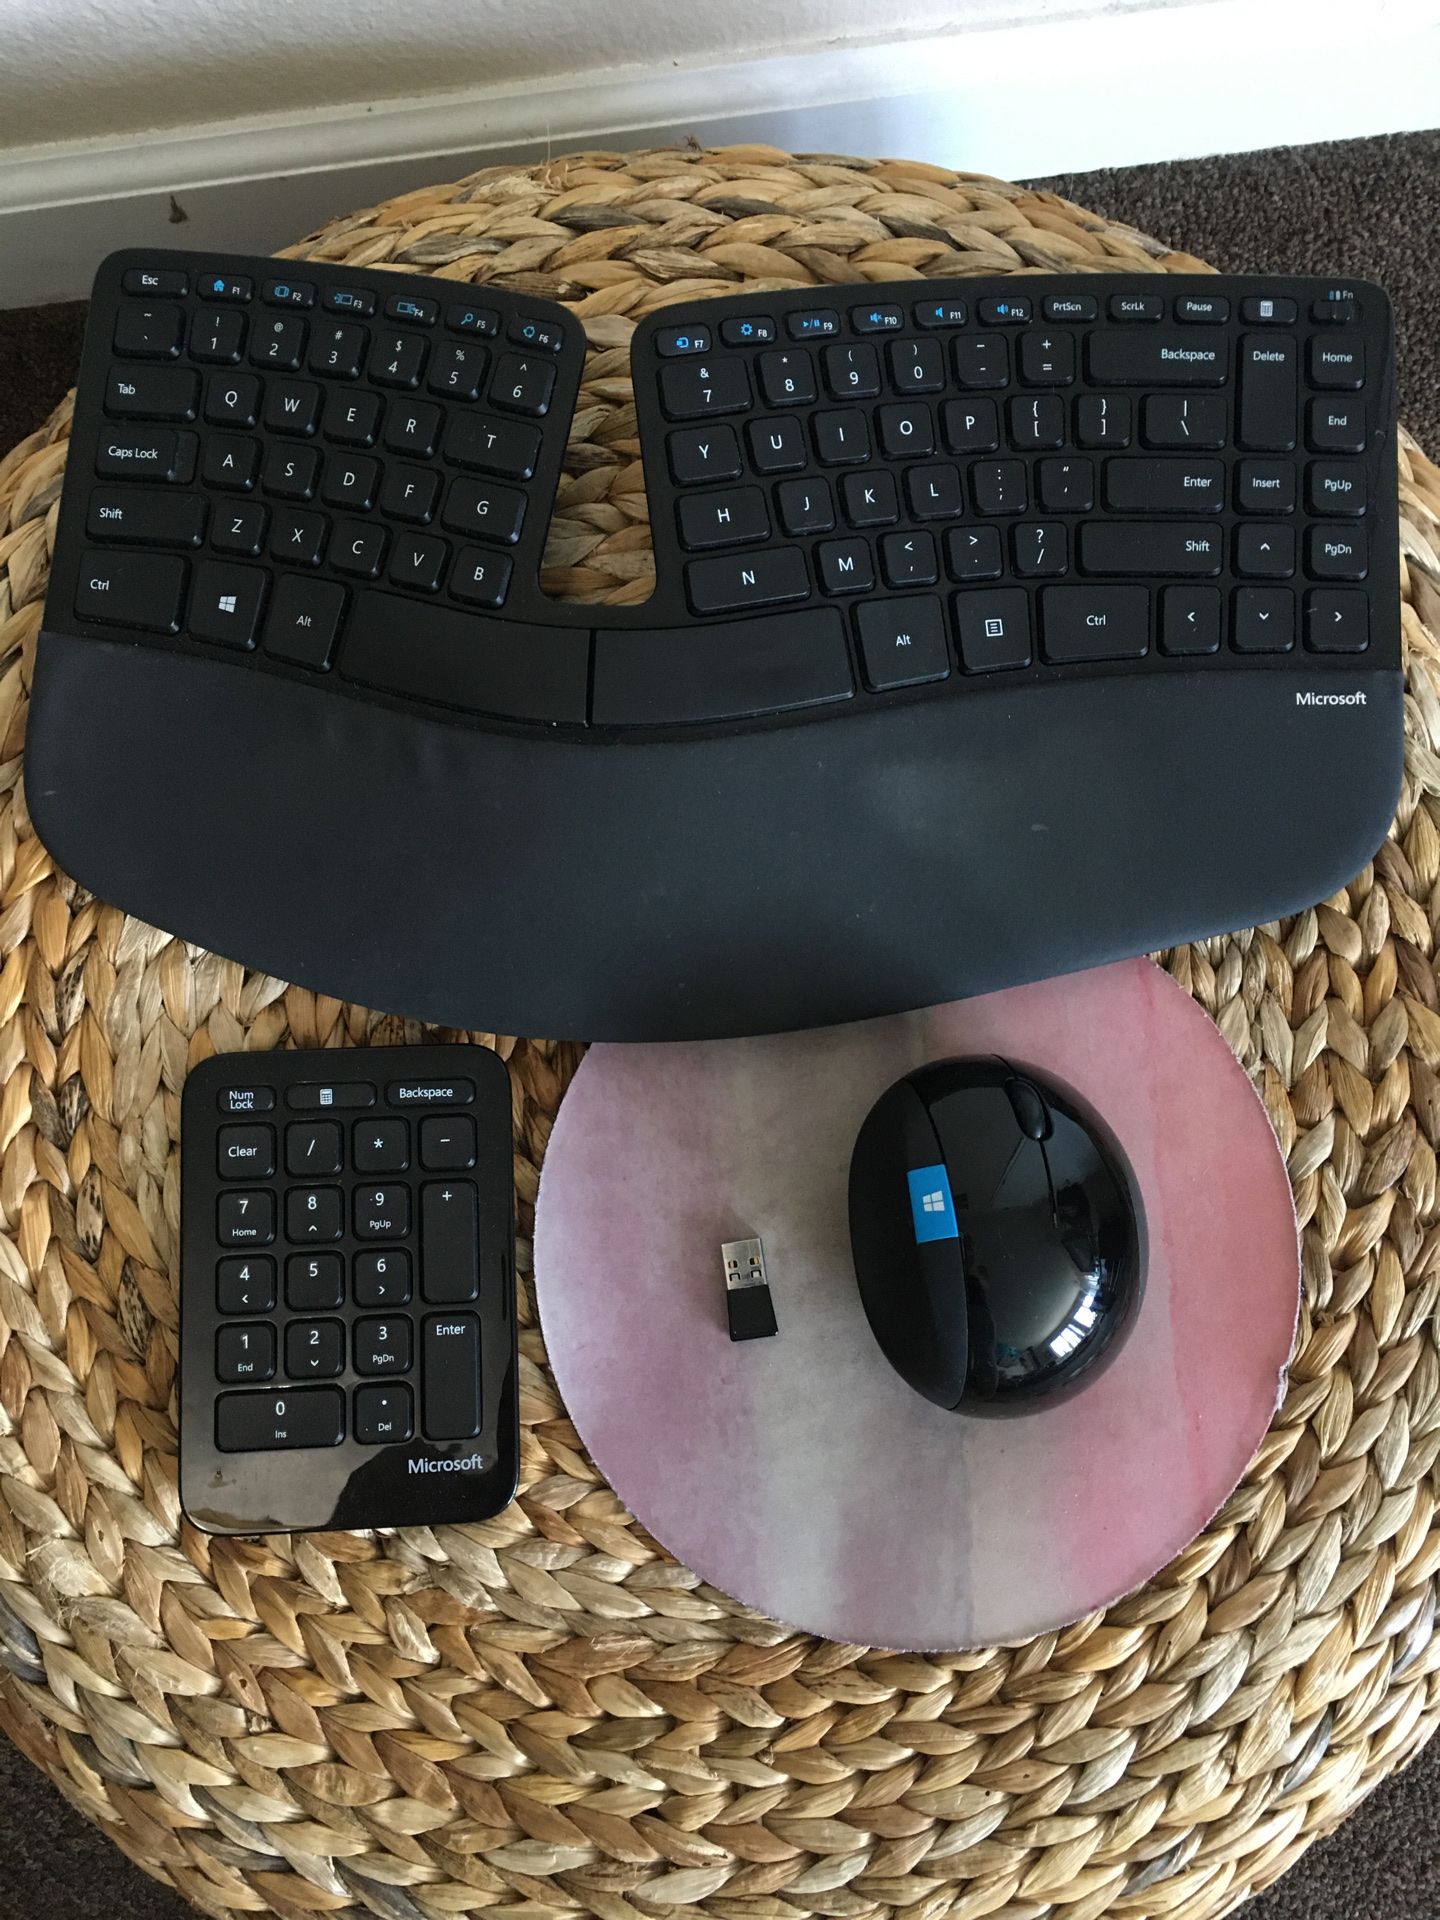 Microsoft wireless mouse and ergonomic keyboard with number pad